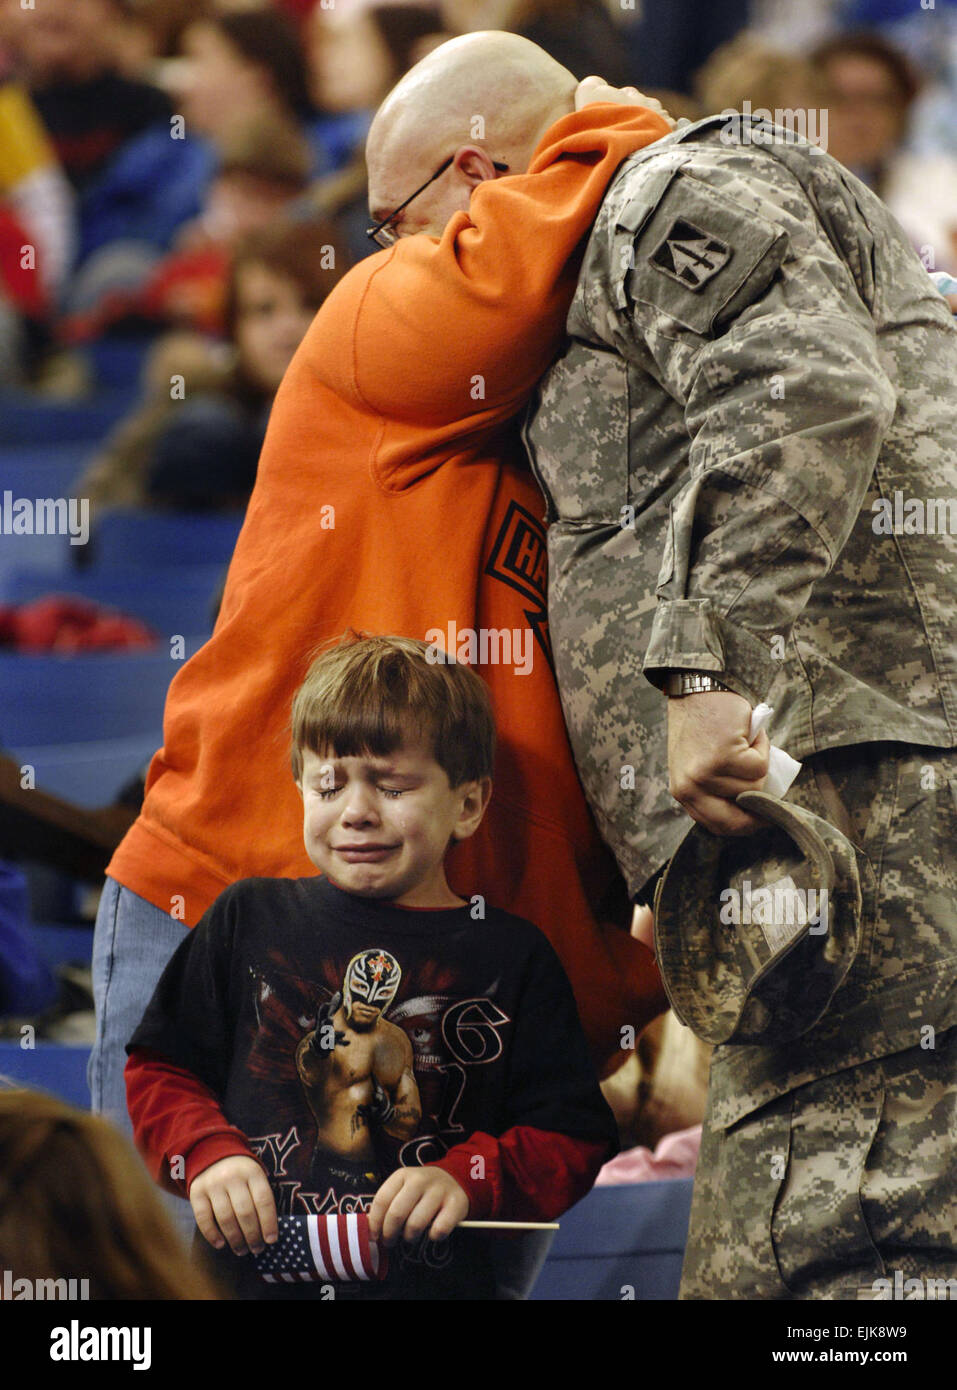 U.S. Army Sgt. Shane Pudgett, of the 76th Infantry Brigade Combat Team, hugs his wife goodbye as his son cries during a going away ceremony Jan. 2, 2008, at the RCA Dome in Indianapolis, Ind. The Indiana National Guard is preparing to deploy its largest amount of Soldiers since World War II with more than 3,400 Soldiers scheduled to depart for Iraq to serve during their 12-month rotation.  Staff Sgt. Russell Klika, Stock Photo